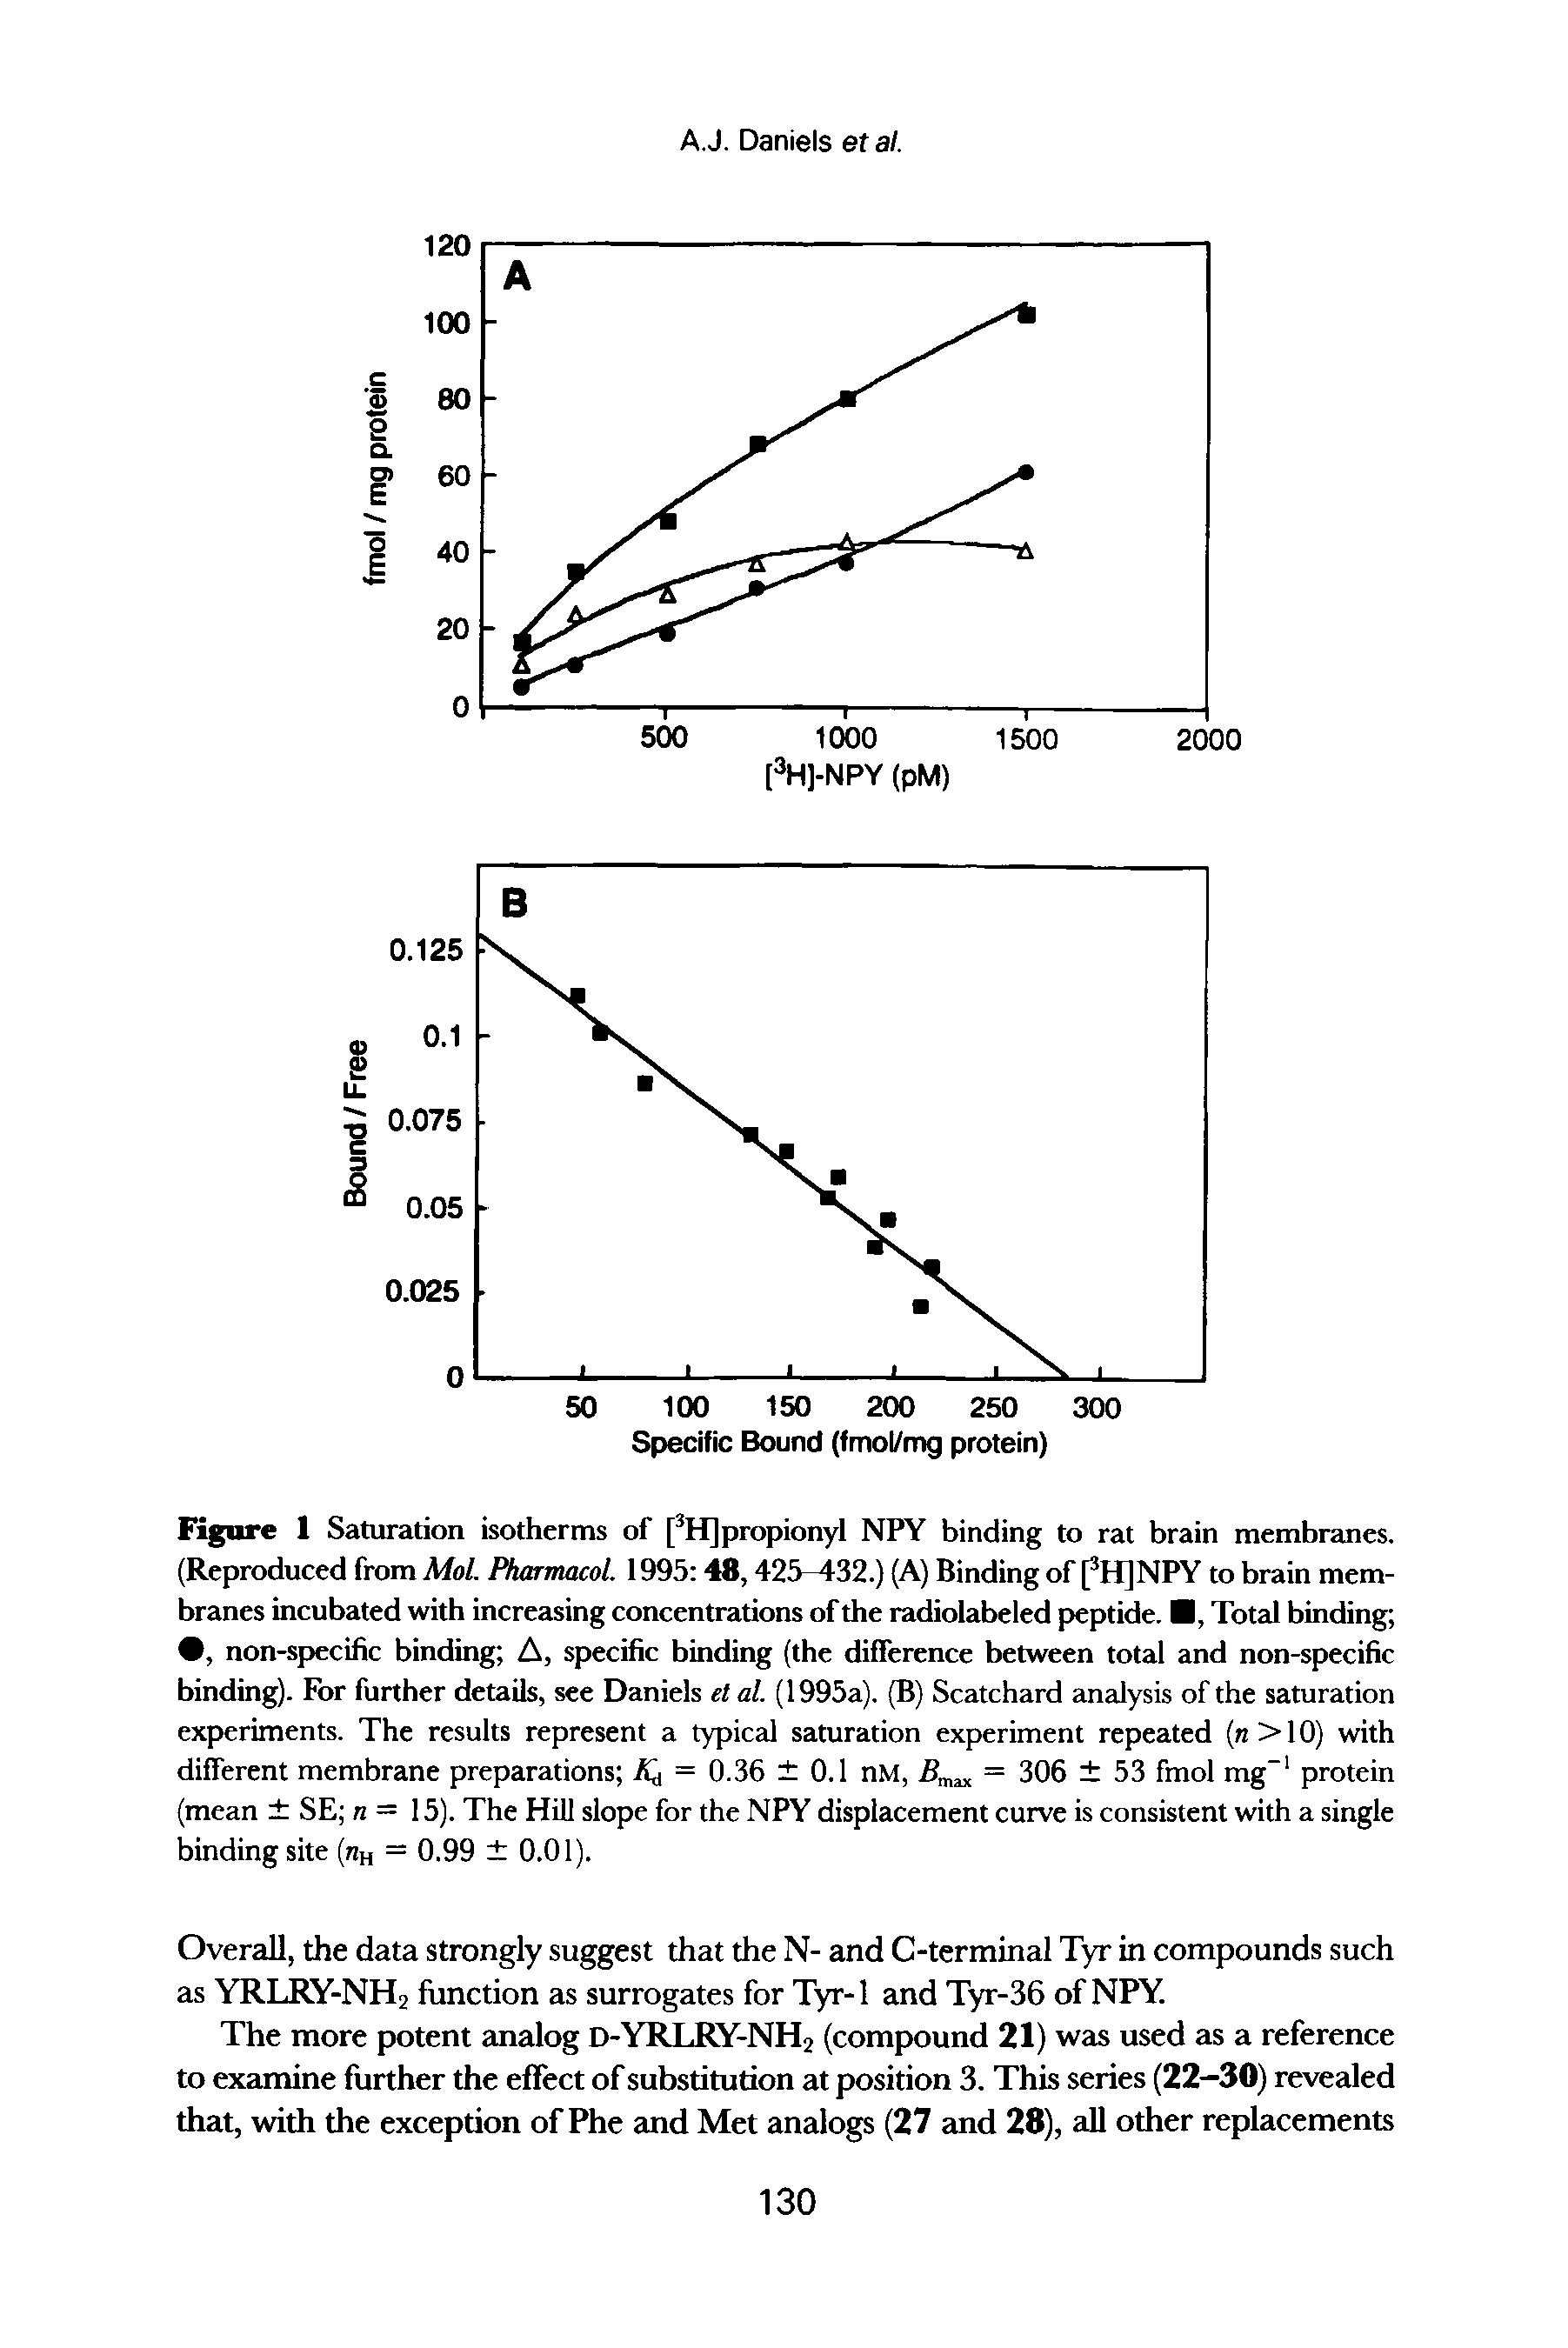 Figure I Saturation isotherms of [3H]propionyl NPY binding to rat brain membranes. (Reproduced from Mol. Pharmacol. 1995 48,425 432.) (A) Binding of [3H]NPY to brain membranes incubated with increasing concentrations of the radiolabeled peptide. , Total binding , non-specific binding A, specific binding (the difference between total and non-specific binding). For further details, see Daniels et al. (1995a). (B) Scatchard analysis of the saturation experiments. The results represent a typical saturation experiment repeated (n >10) with different membrane preparations = 0.36 0.1 nM, = 306 53 fmol mg-1 protein (mean SE n = 15). The Hill slope for the NPY displacement curve is consistent with a single binding site (nH = 0.99 0.01).